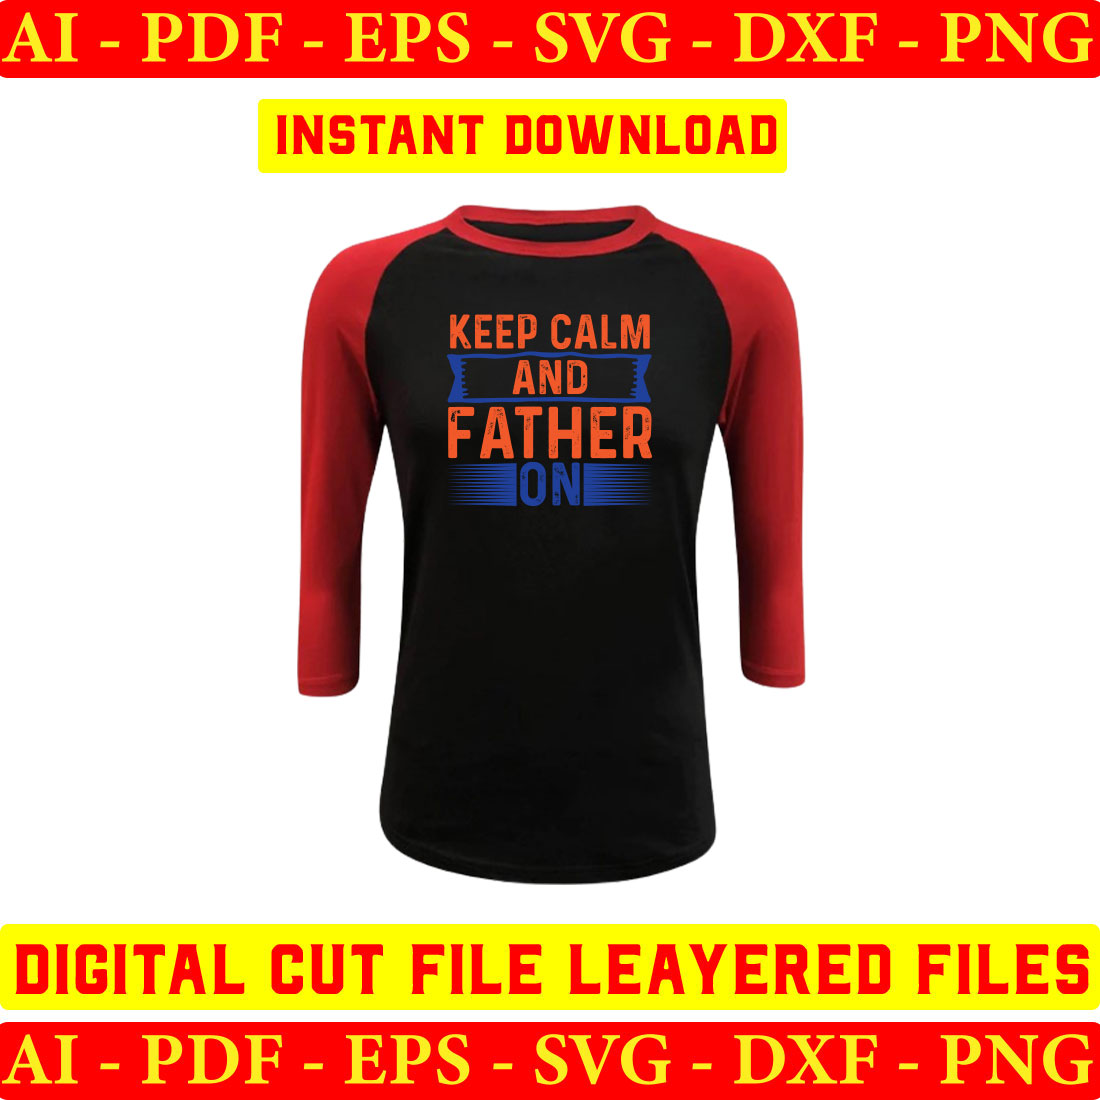 Black and red shirt with the words keep calm and father on it.